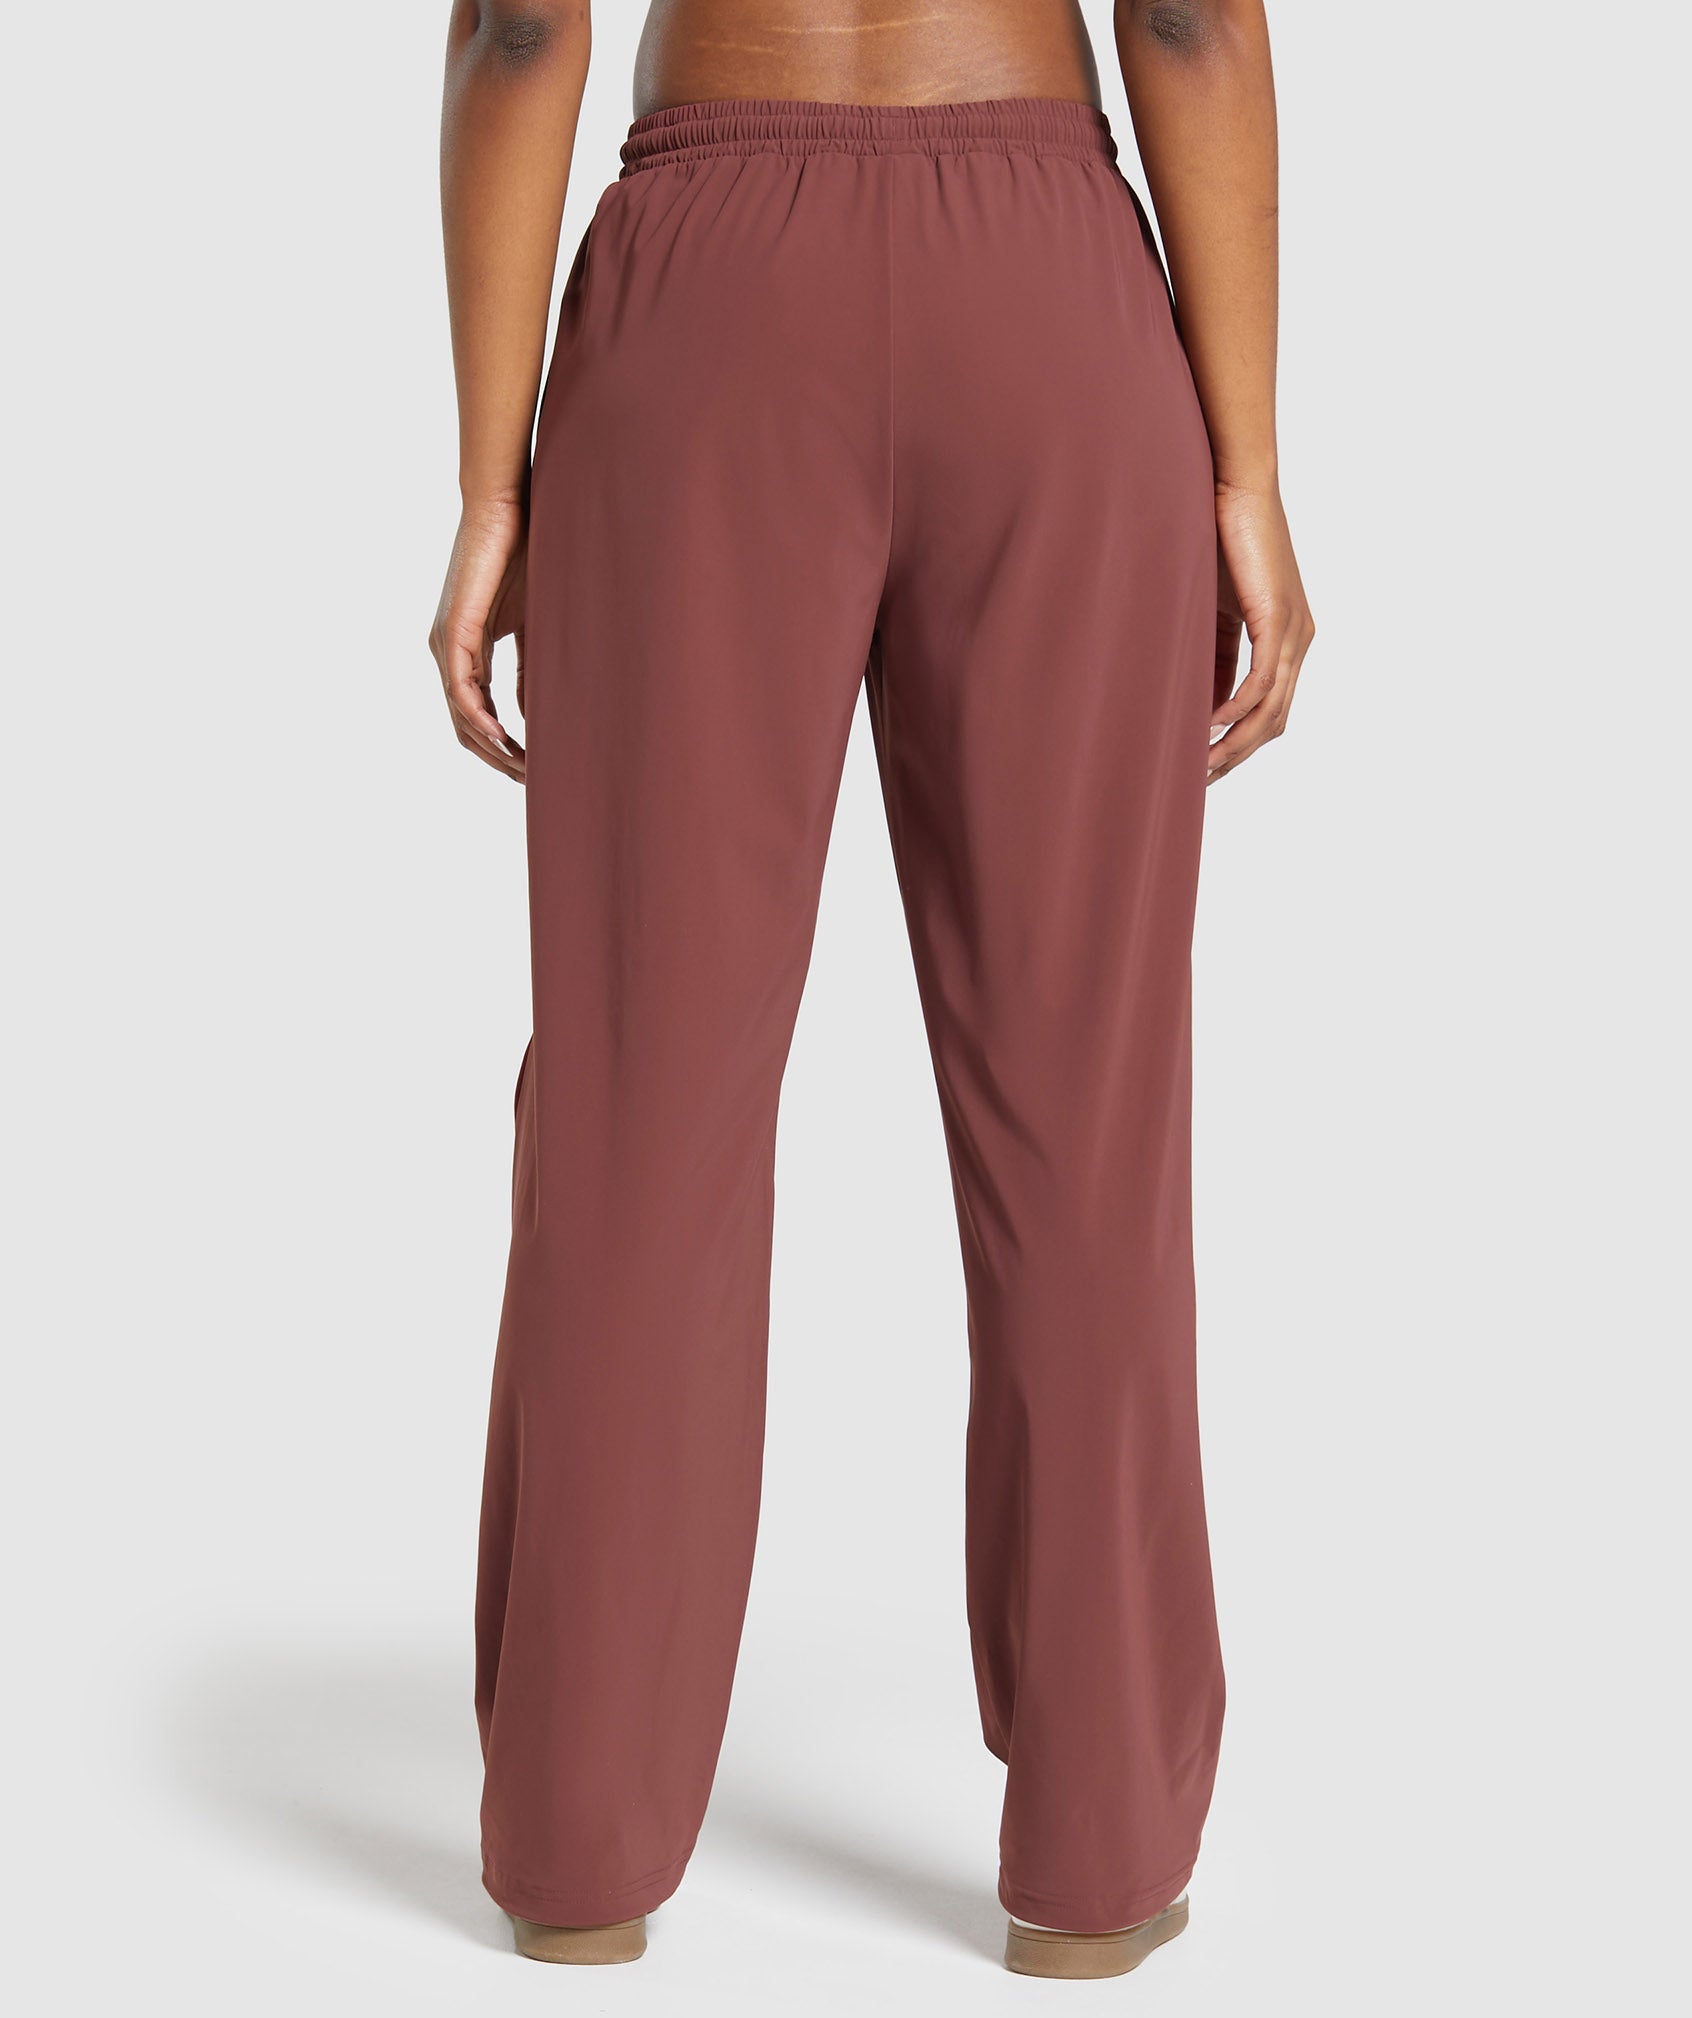 Stitch Feature Woven Pants in Burgundy Brown - view 2